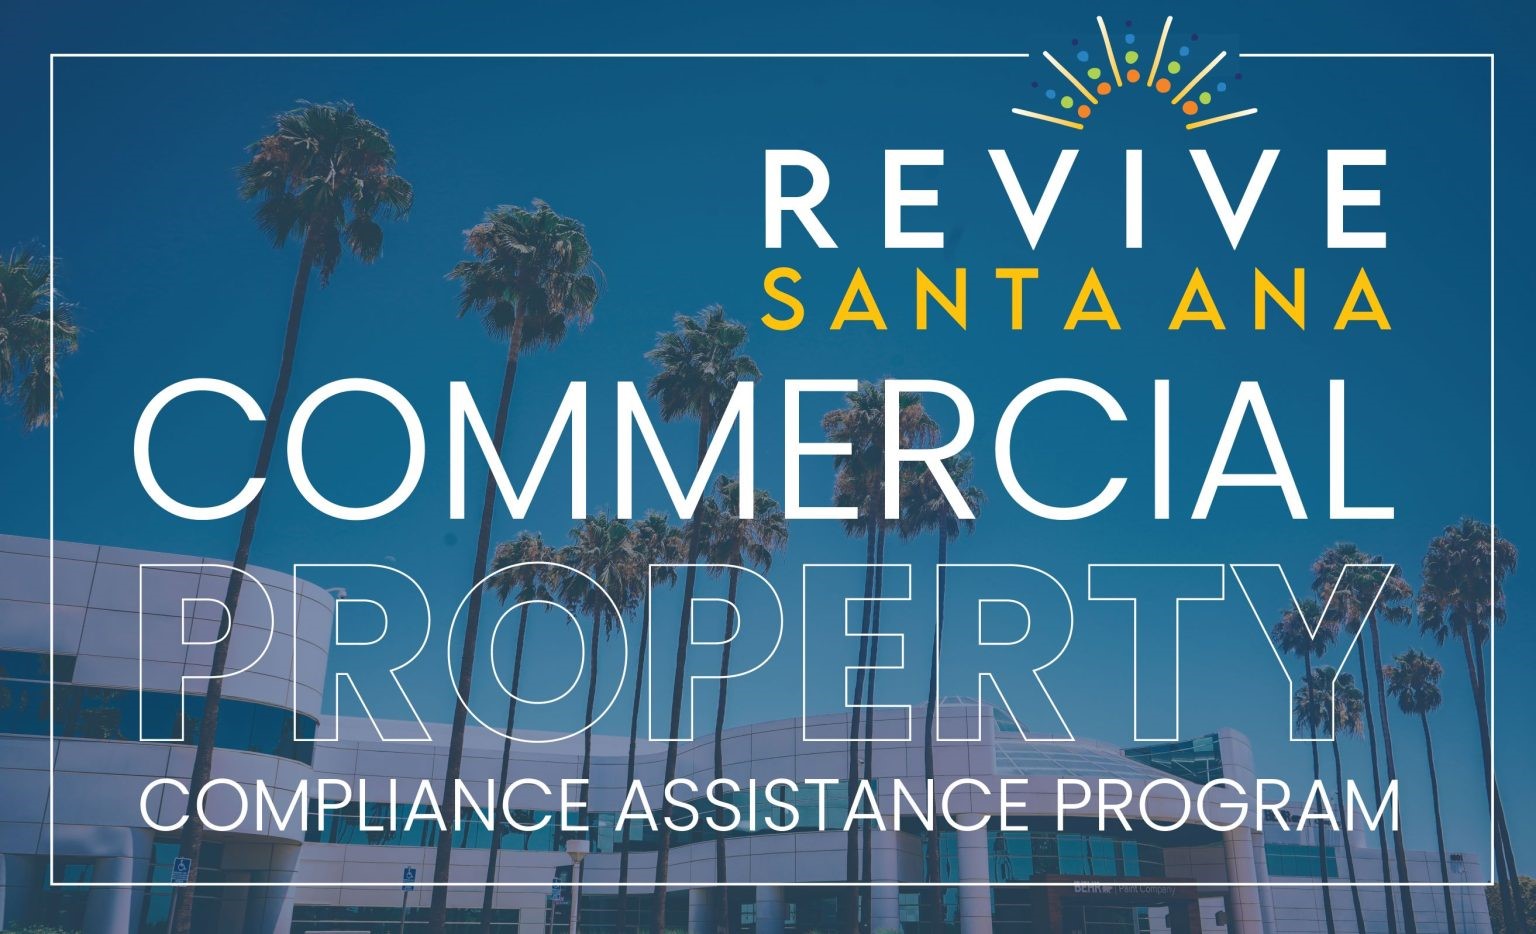 Commercial Property Compliance Assistance